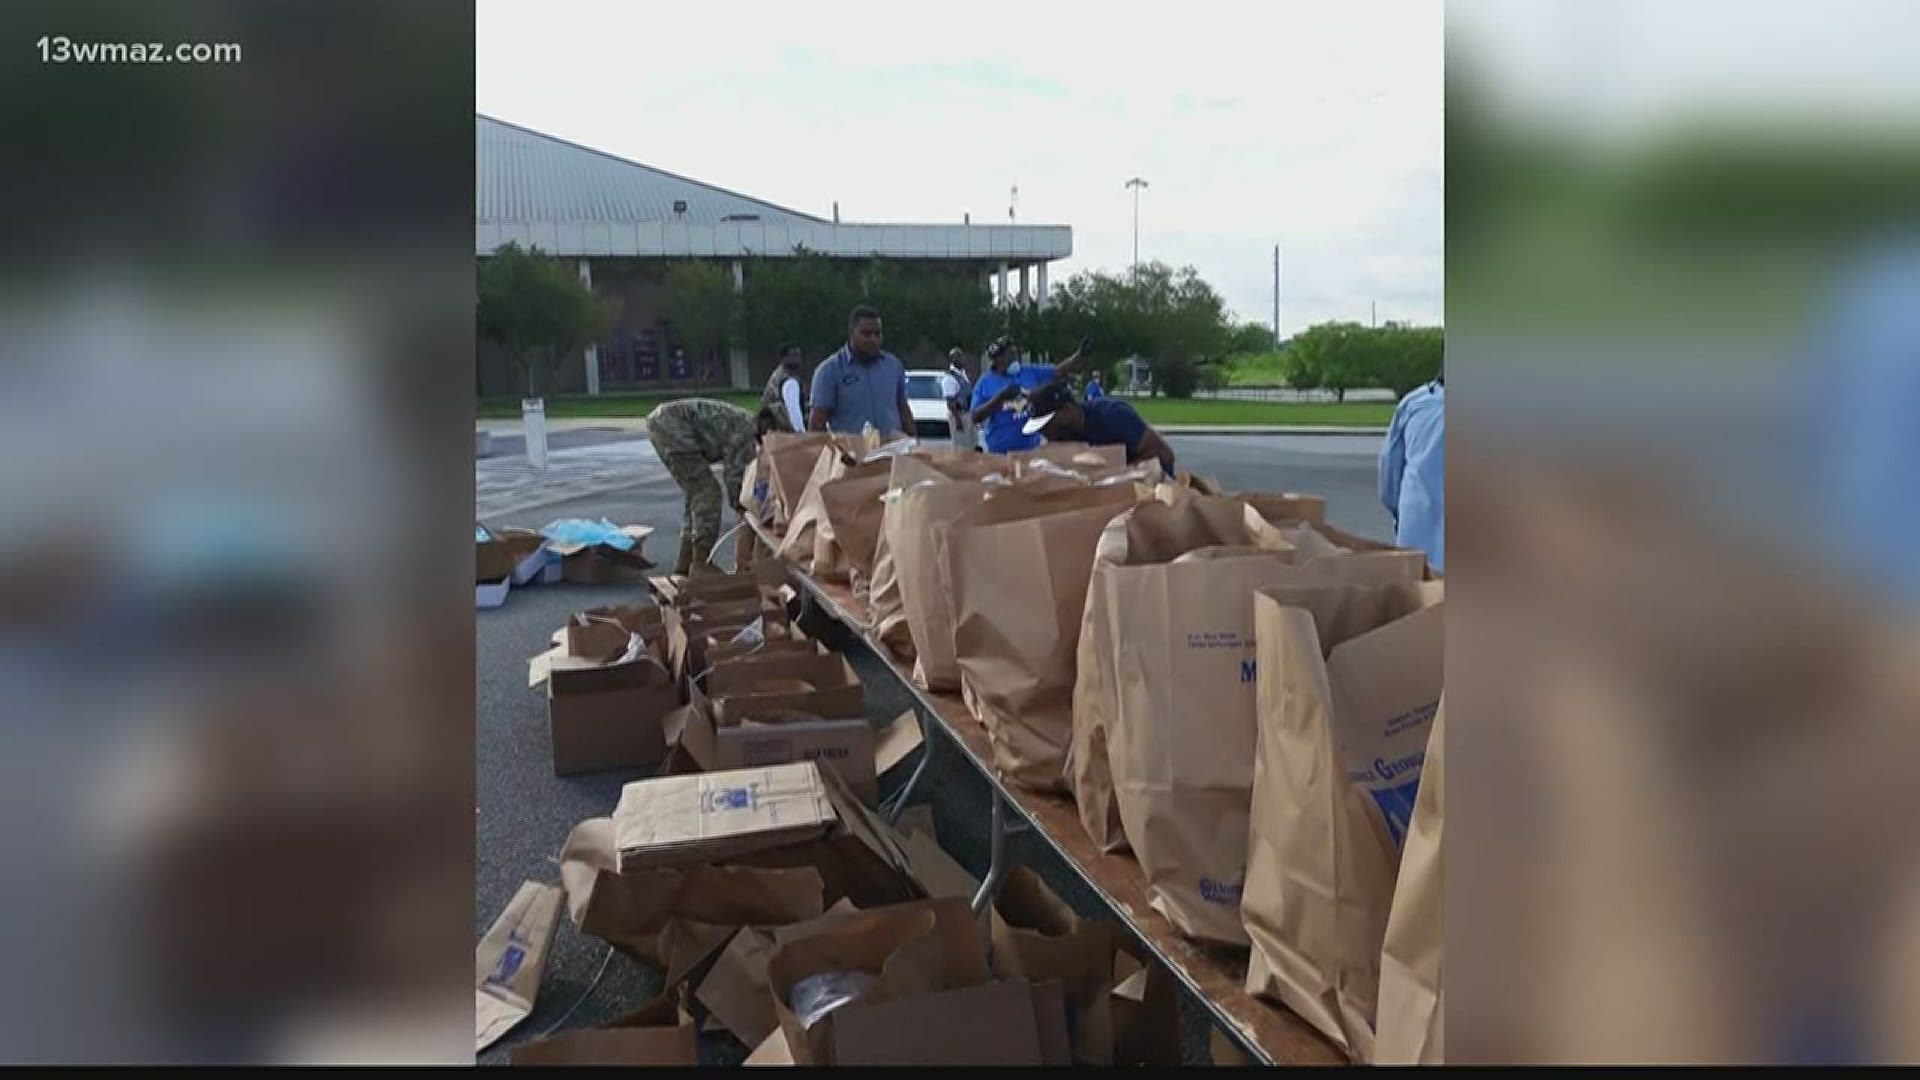 5 local churches are partnering together for a massive food distribution effort this weekend.